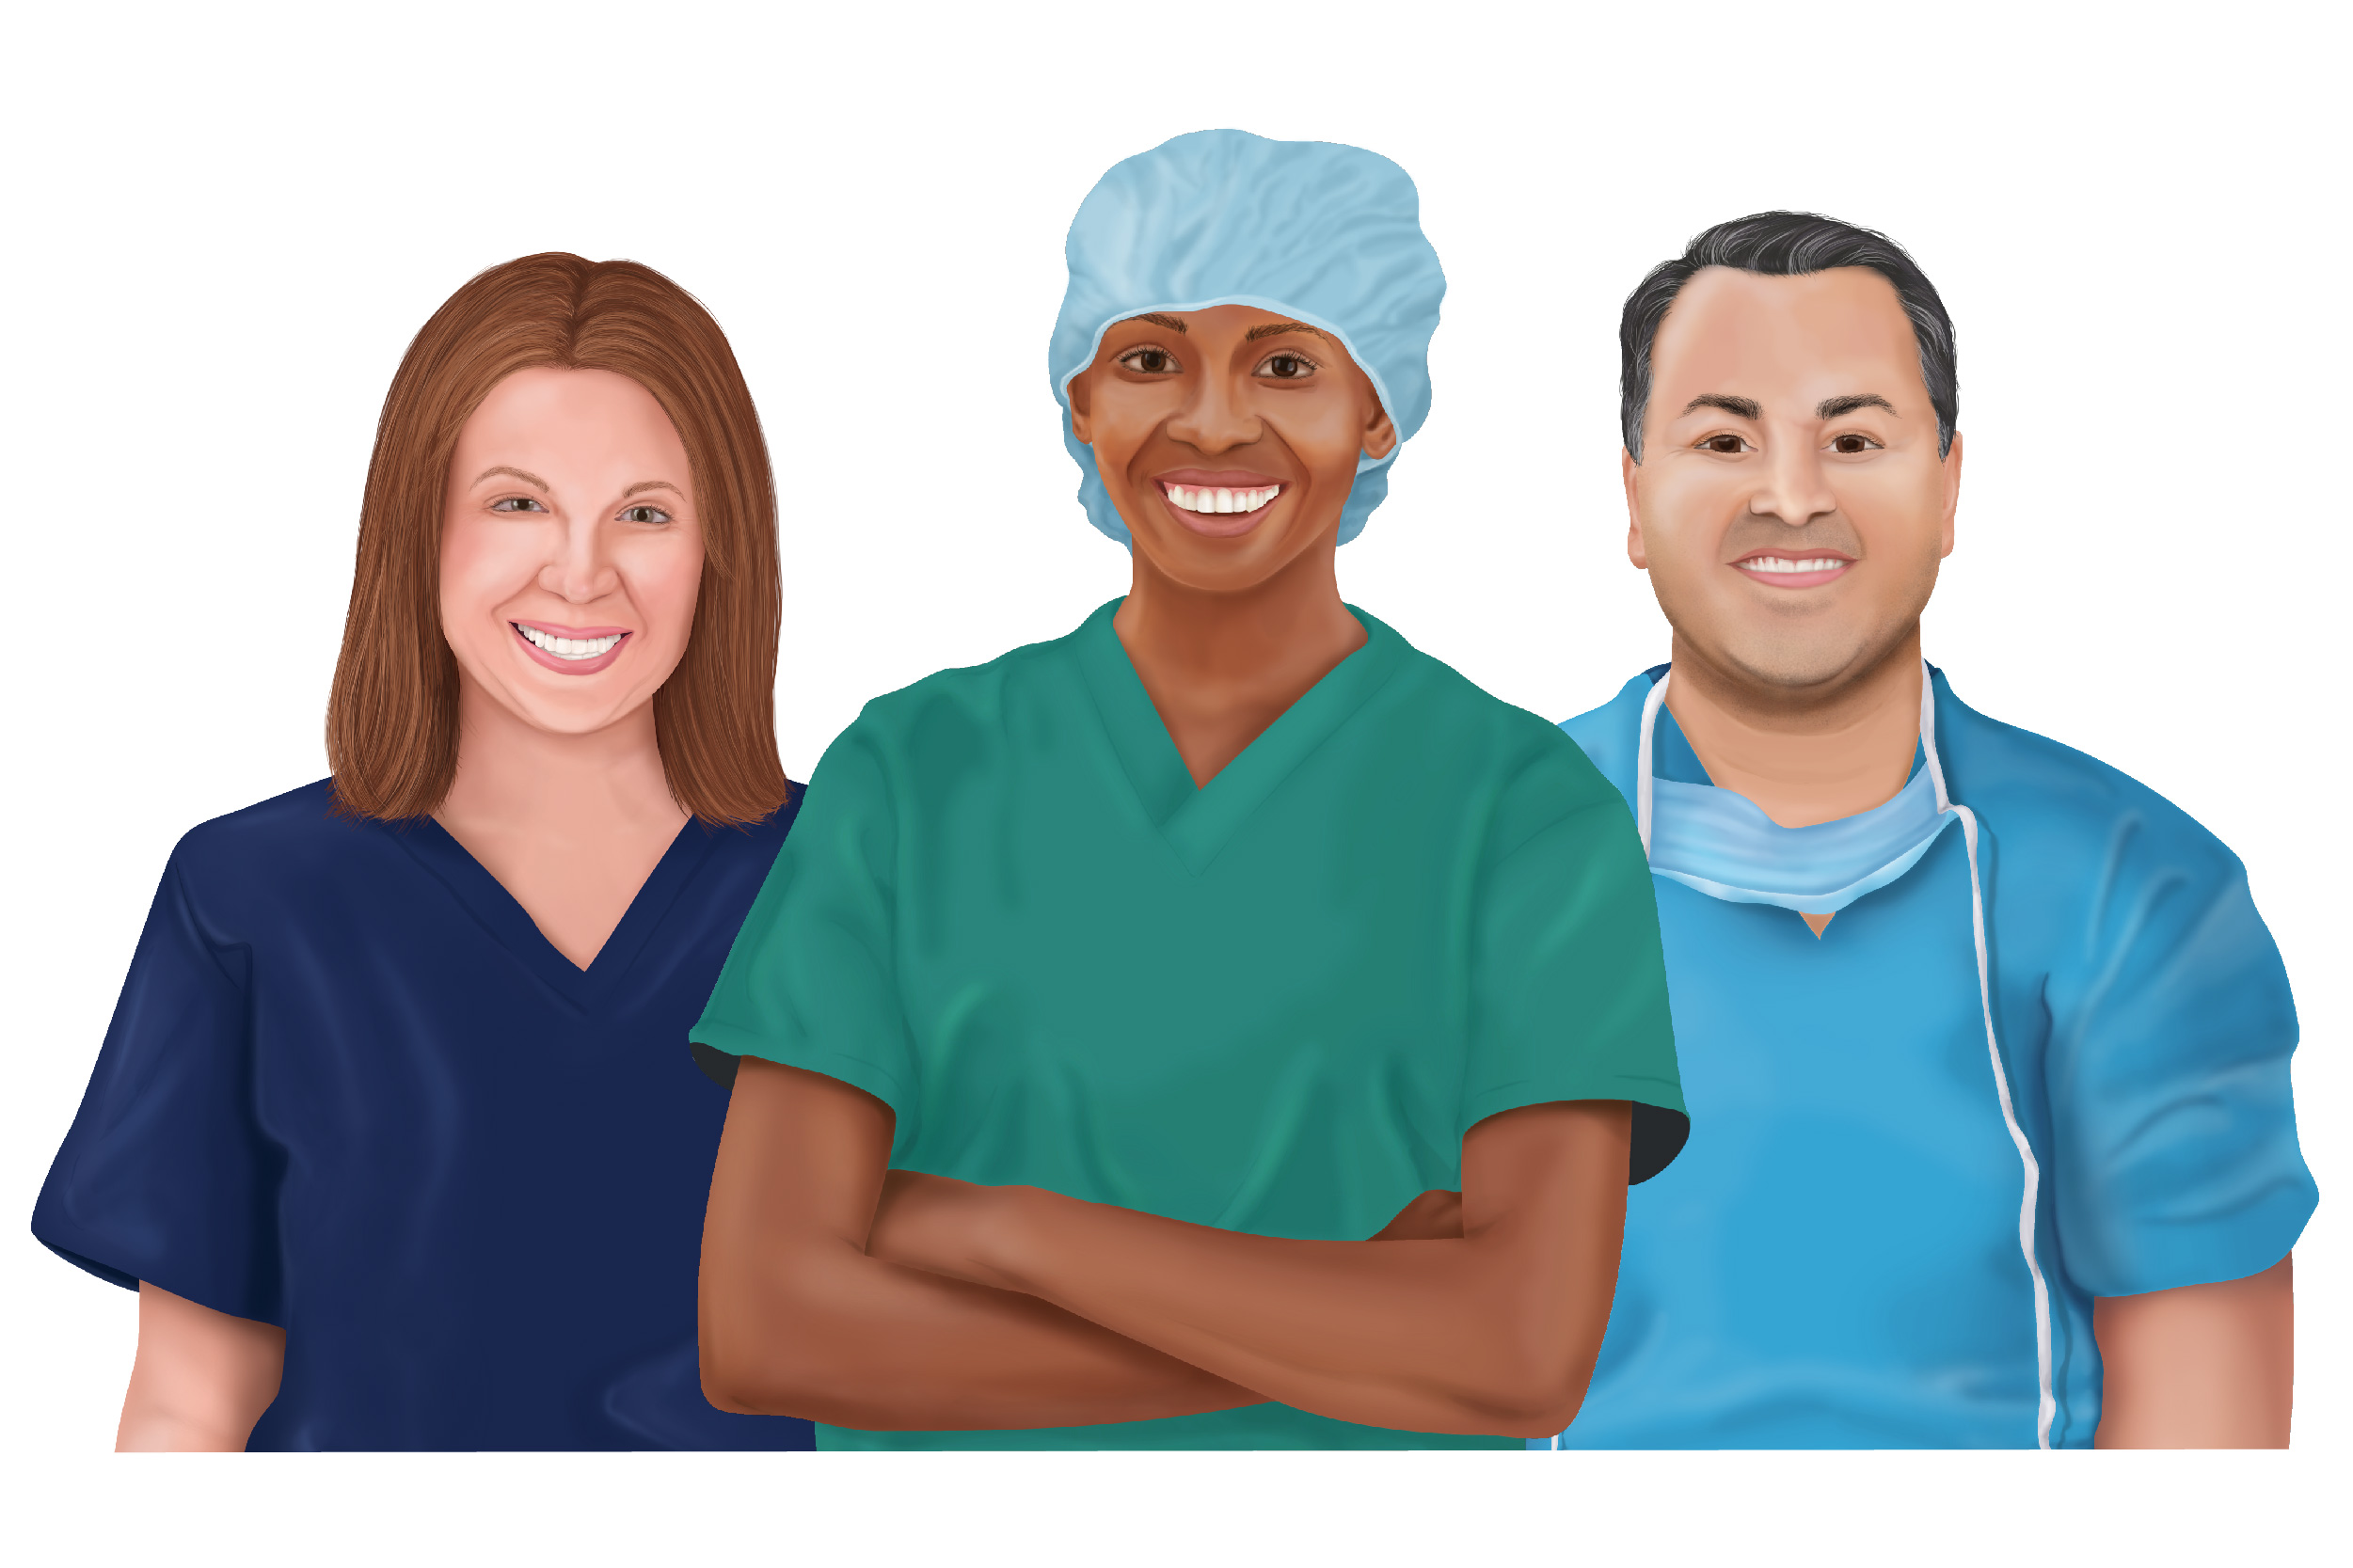 An illustration of a group of CRNAs standing and smiling together